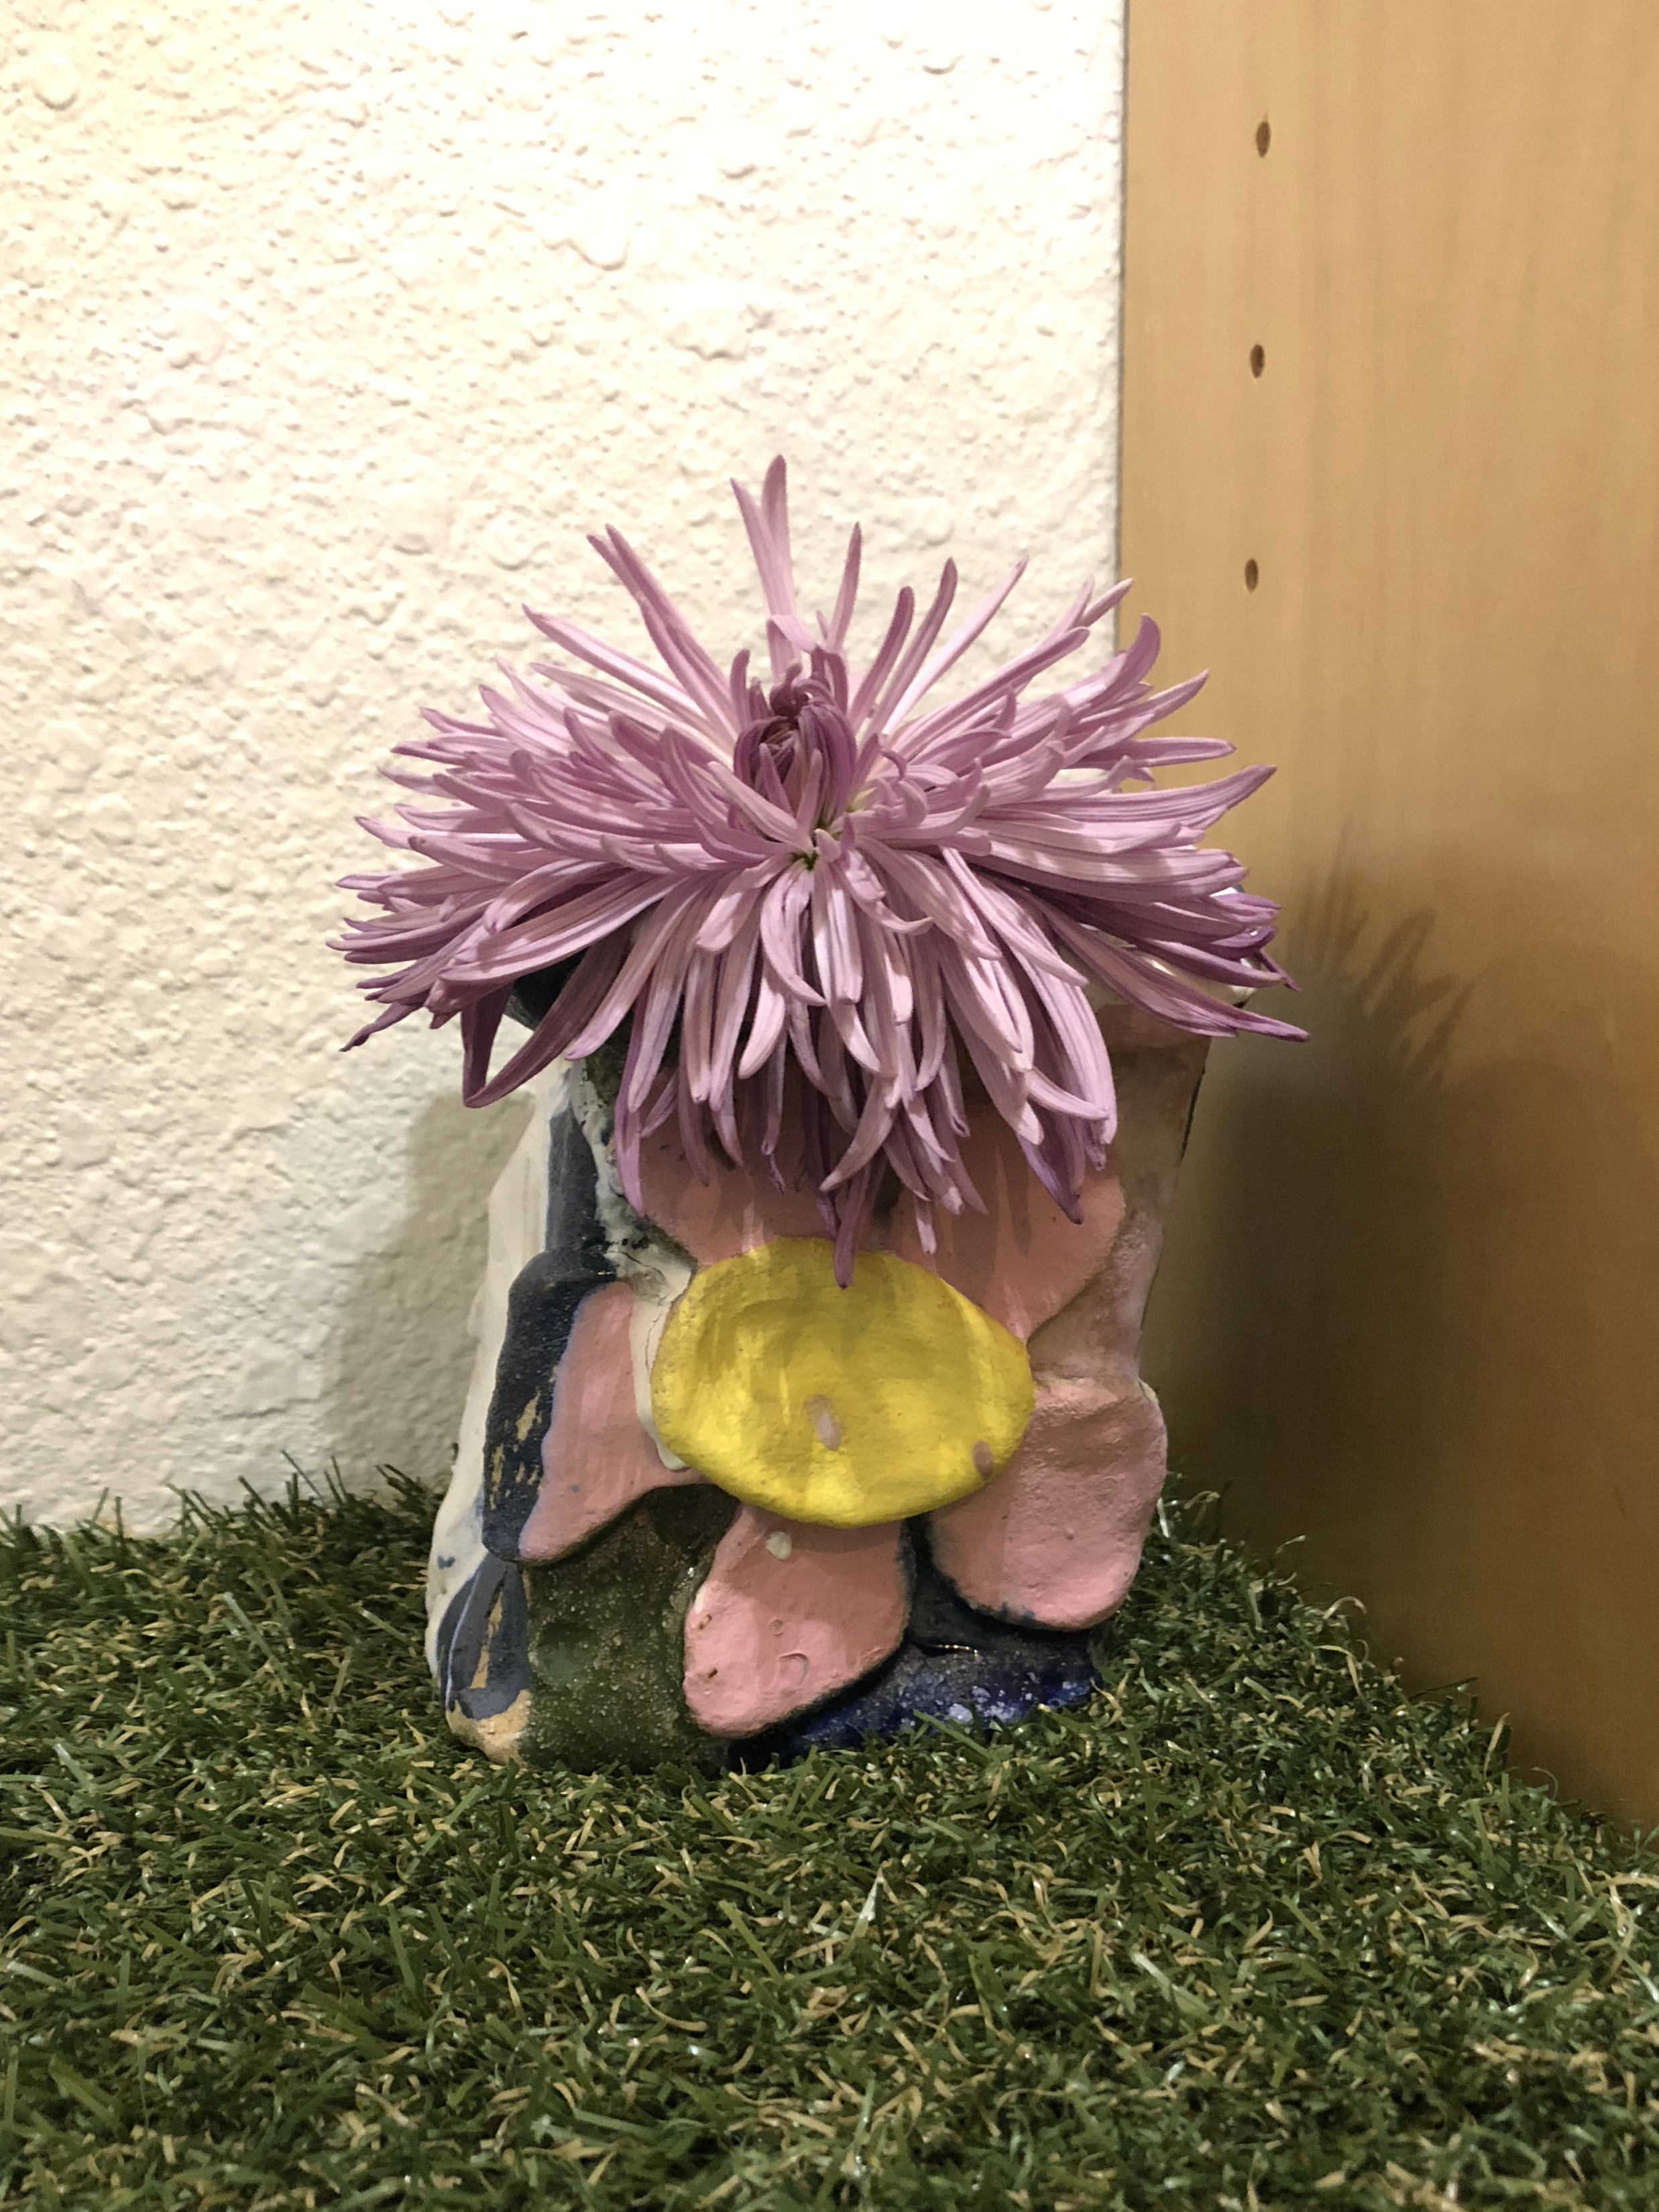 A small, colorful ceramic vase with a pink flower in it on astroturf